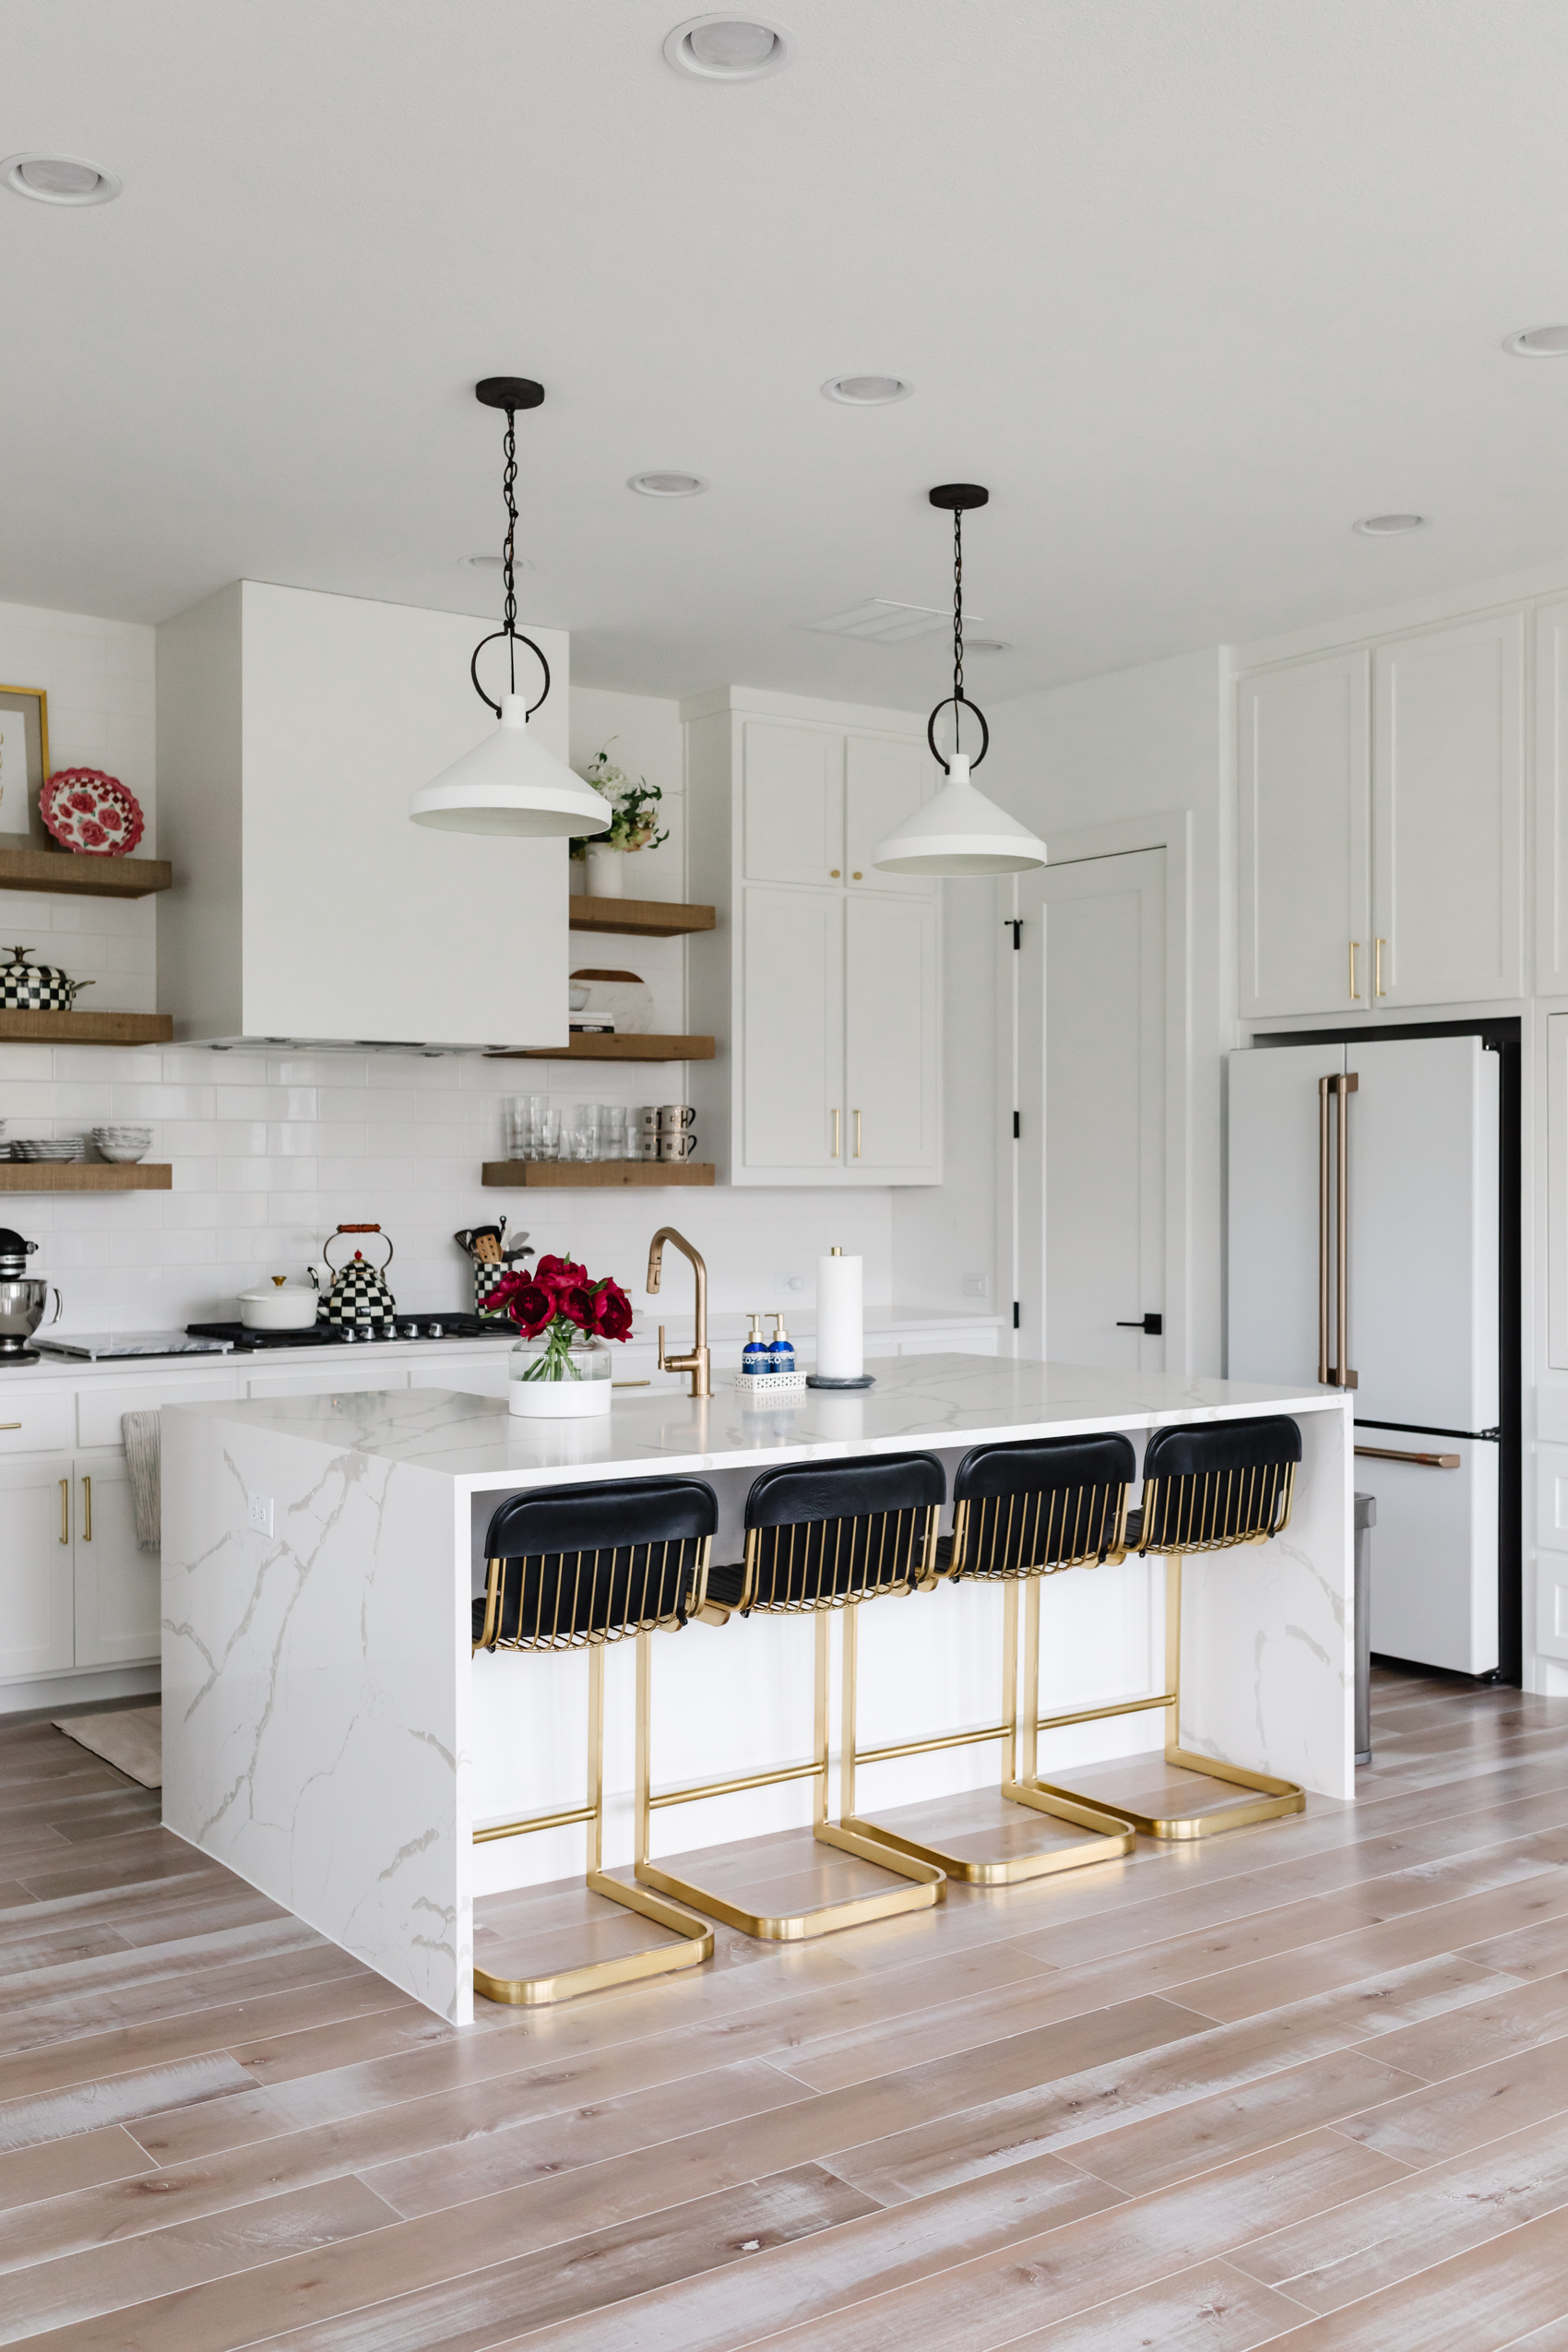 Transitional kitchen with quartz waterfall island, brass Brizo faucet, McGee & Co Pendant lights, CB2 Barstools, Cafe Appliances Refrigerator, Rejuvenation West Slope hardware, MacKenzie-Childs utensil holder kettle and more